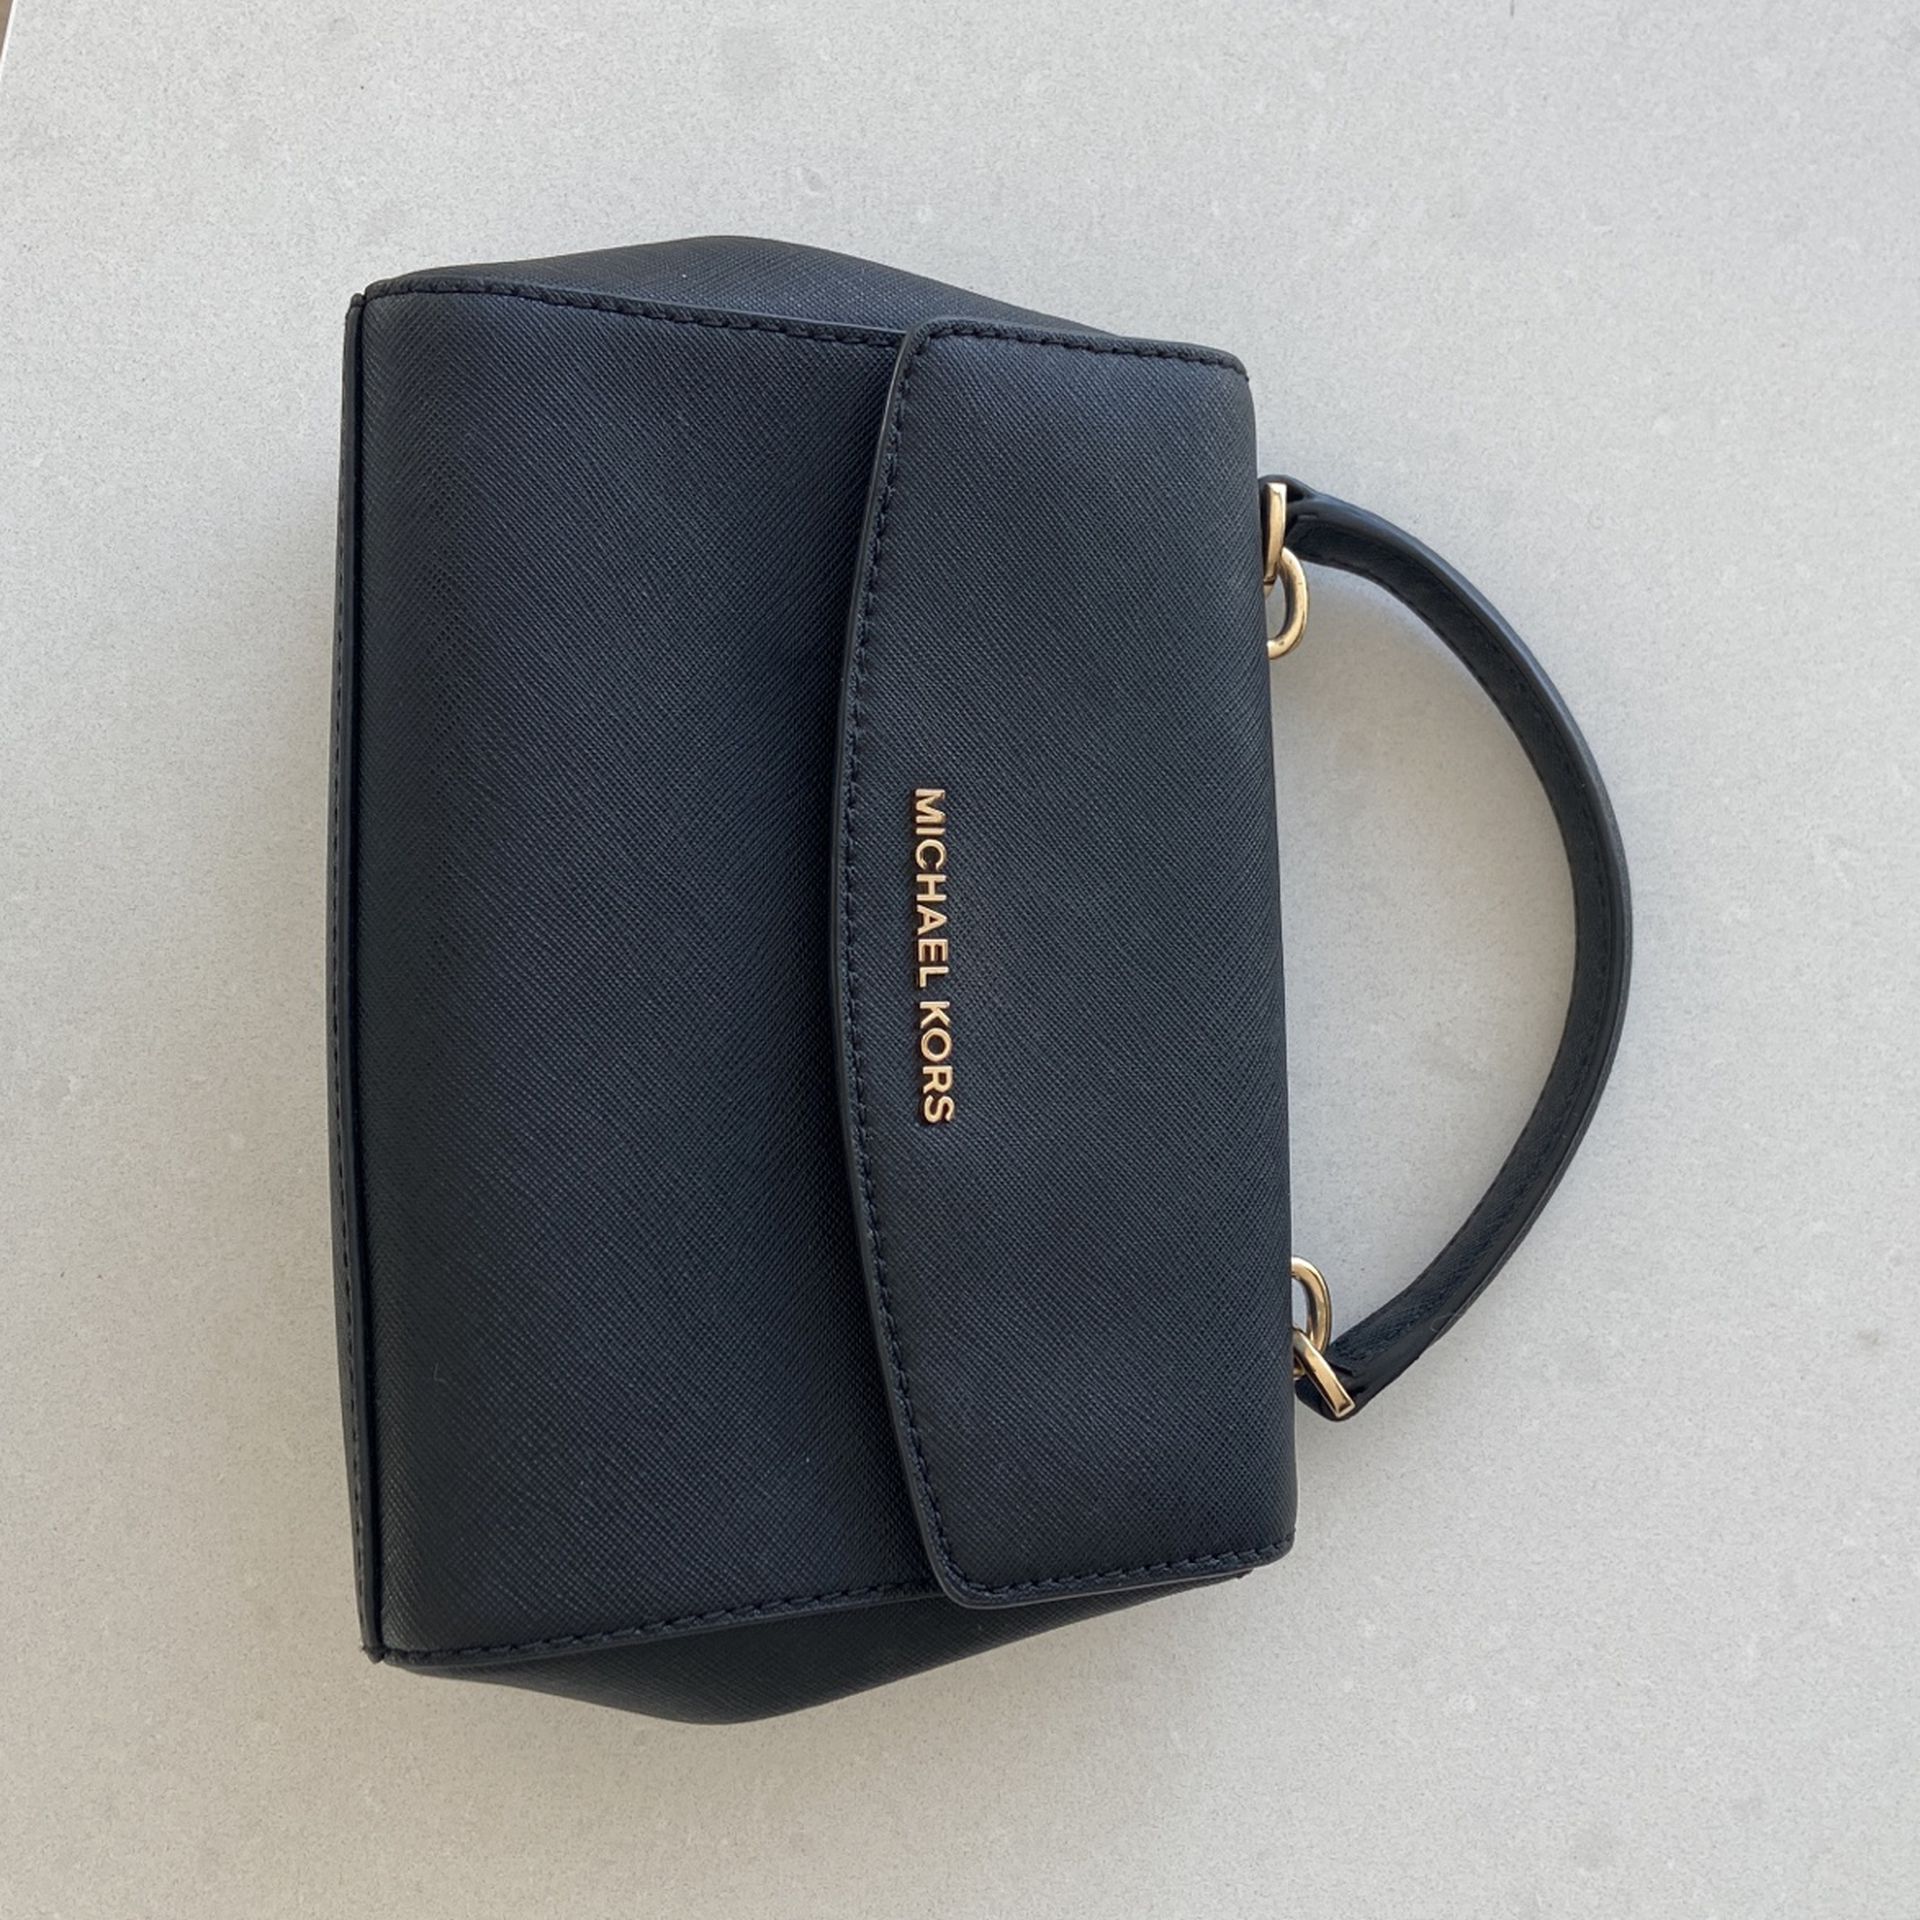 Michael Kors Selma Mini Messenger Bag for Sale in Queens, NY - OfferUp